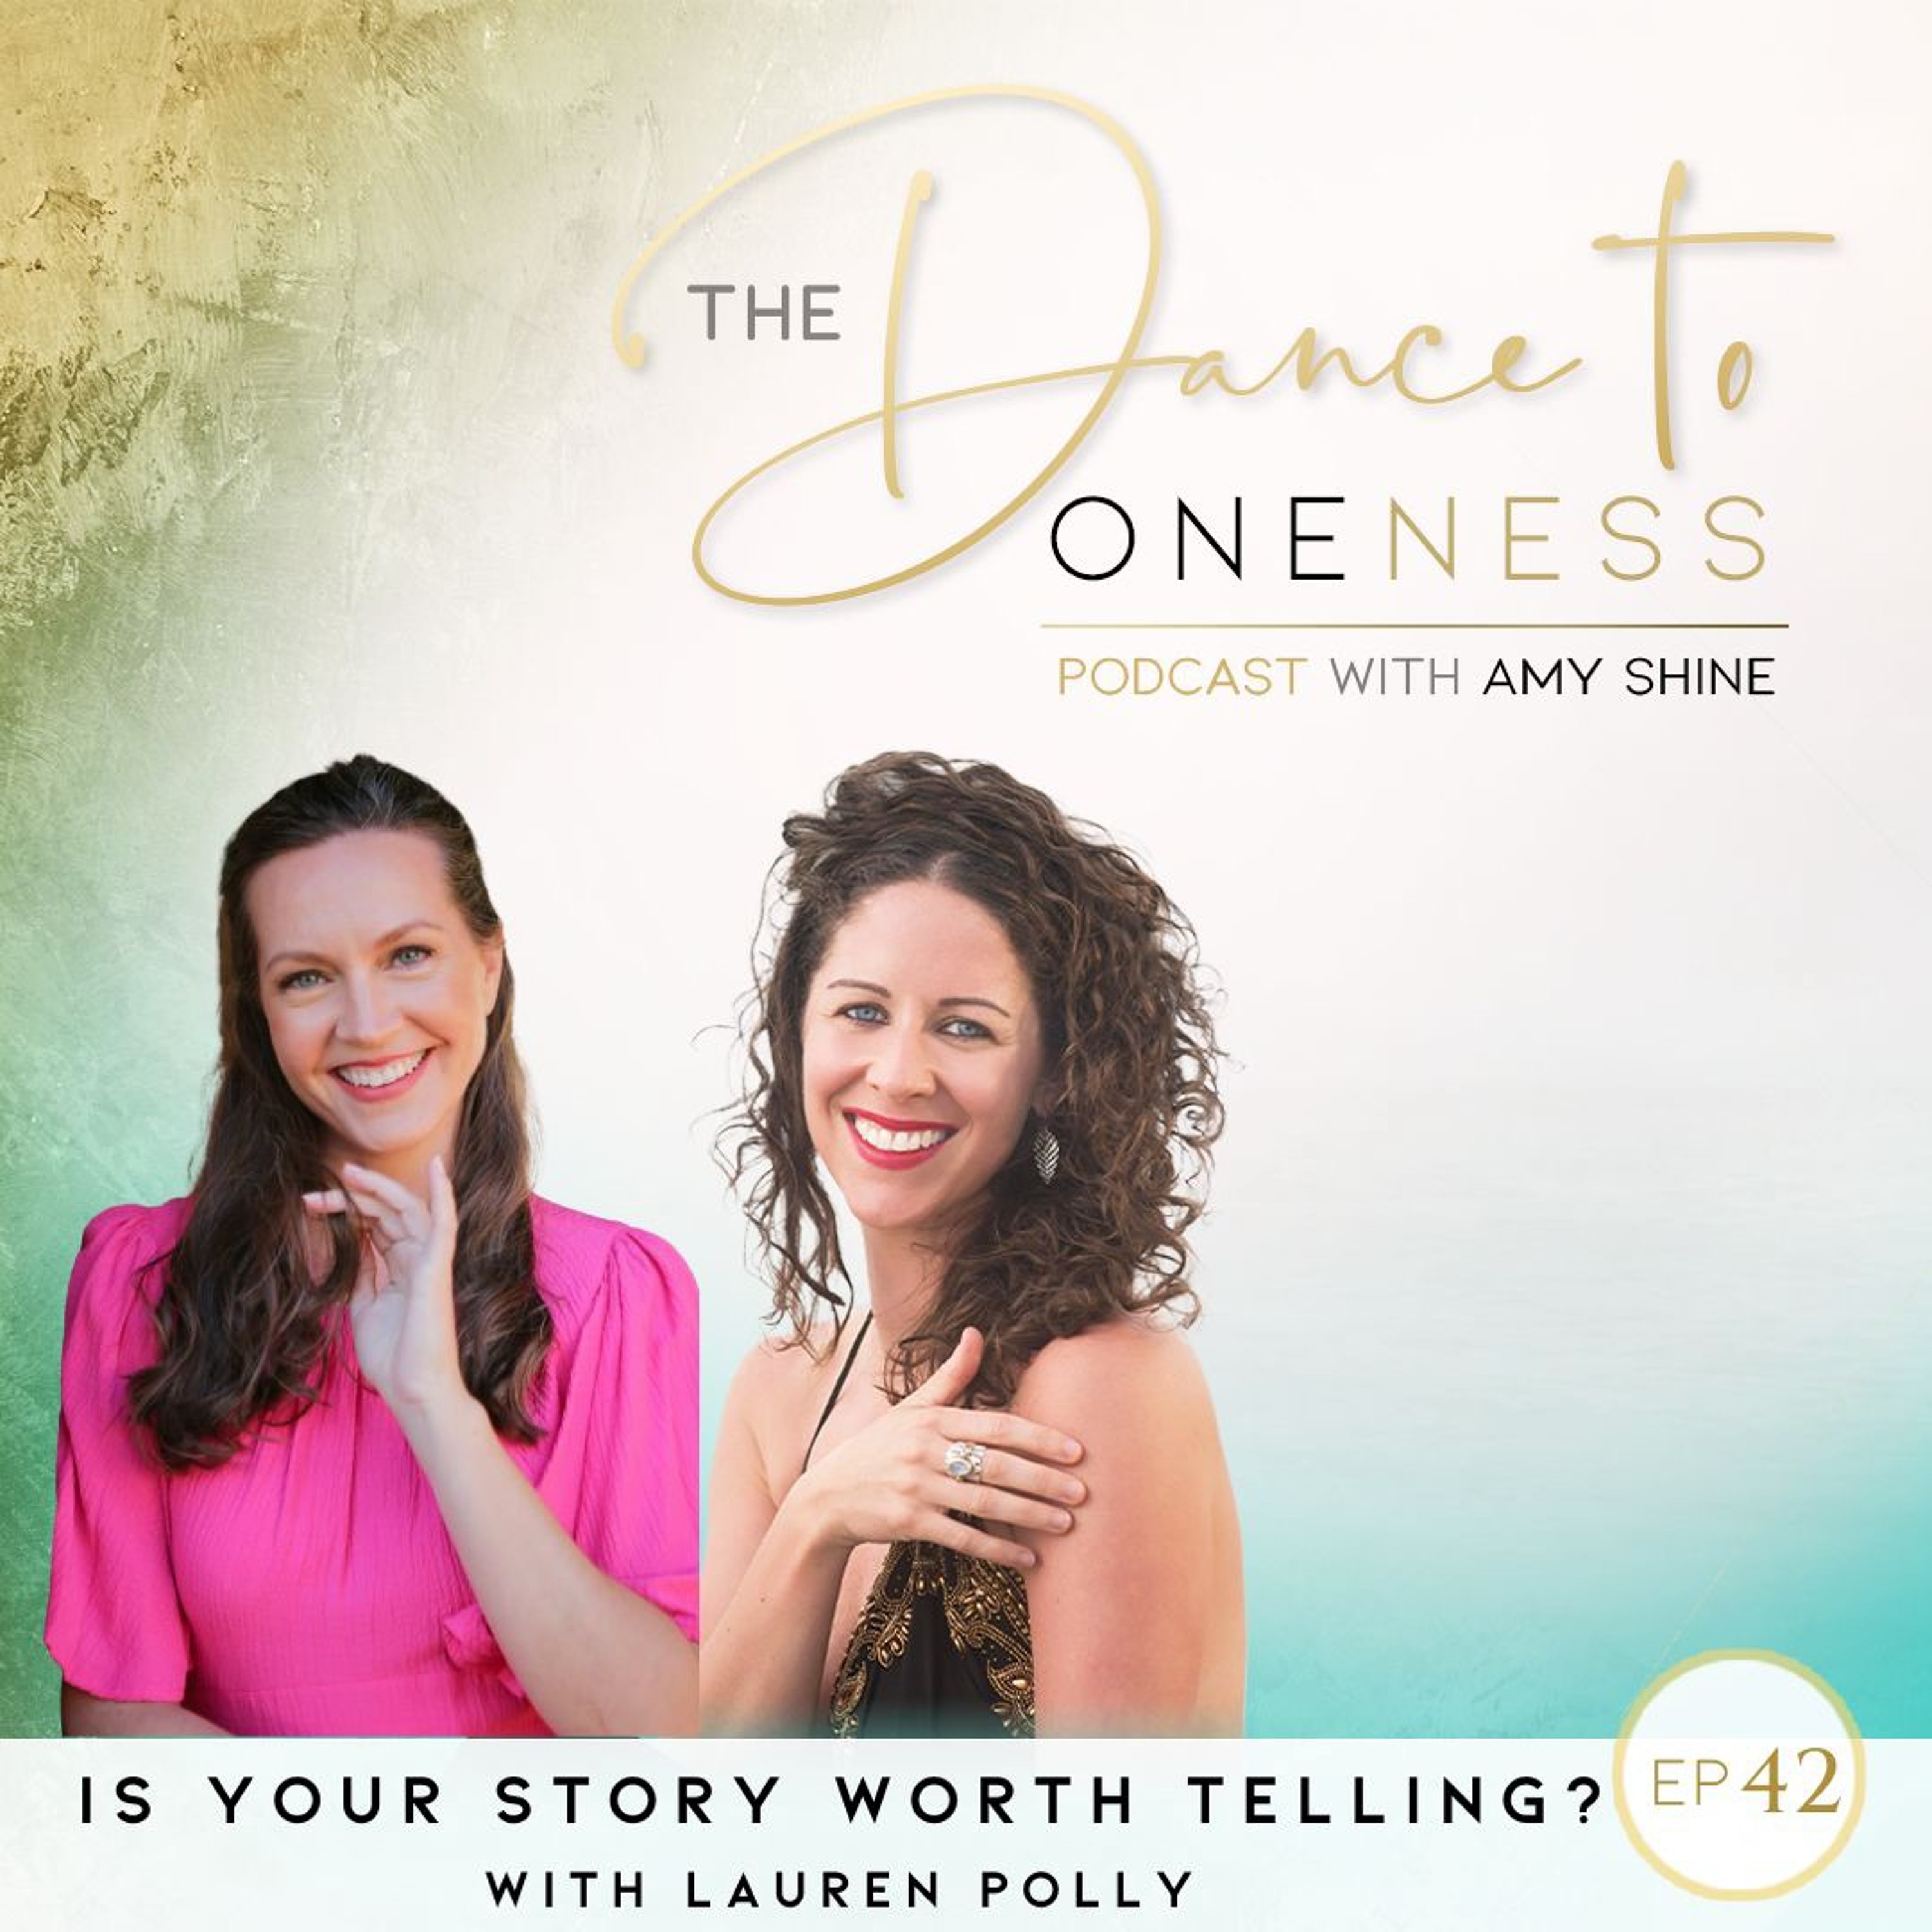 Episode 43 Is Your Story Worth Telling? With Guest Lauren Polly